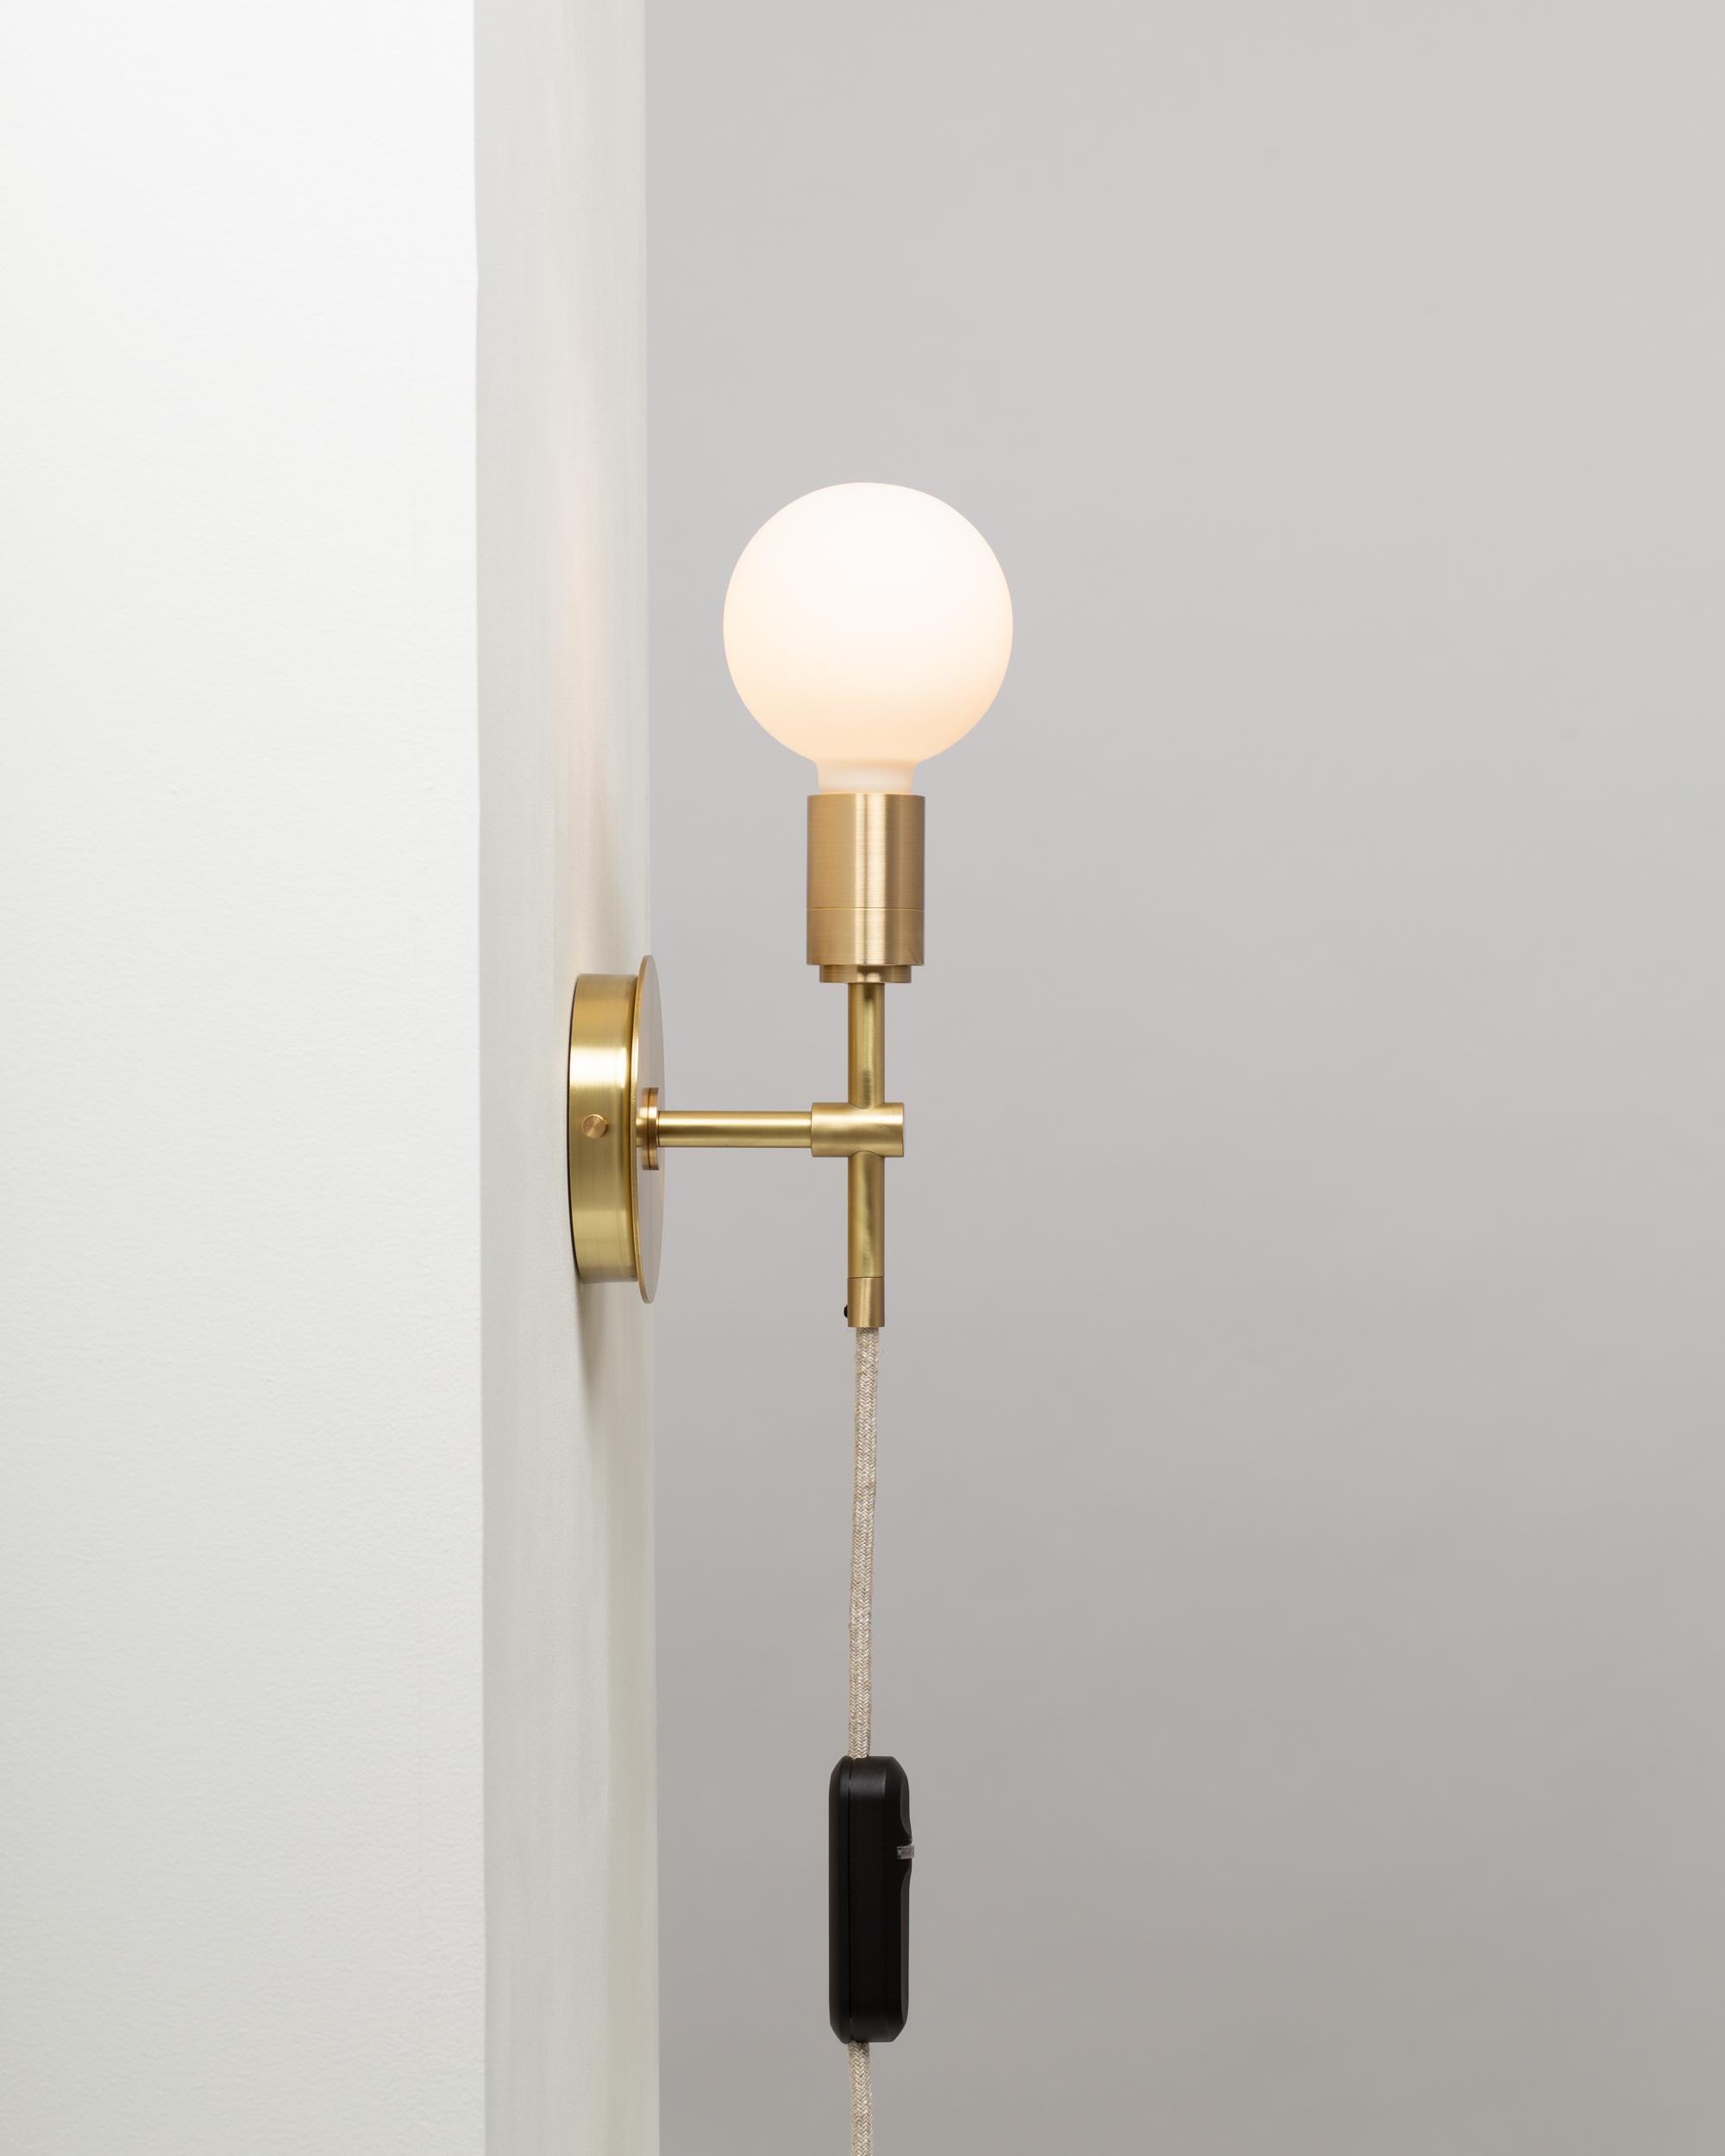 British Sphere Stem Wall Mount Sconce Integrated Dimmer by Lights of London For Sale